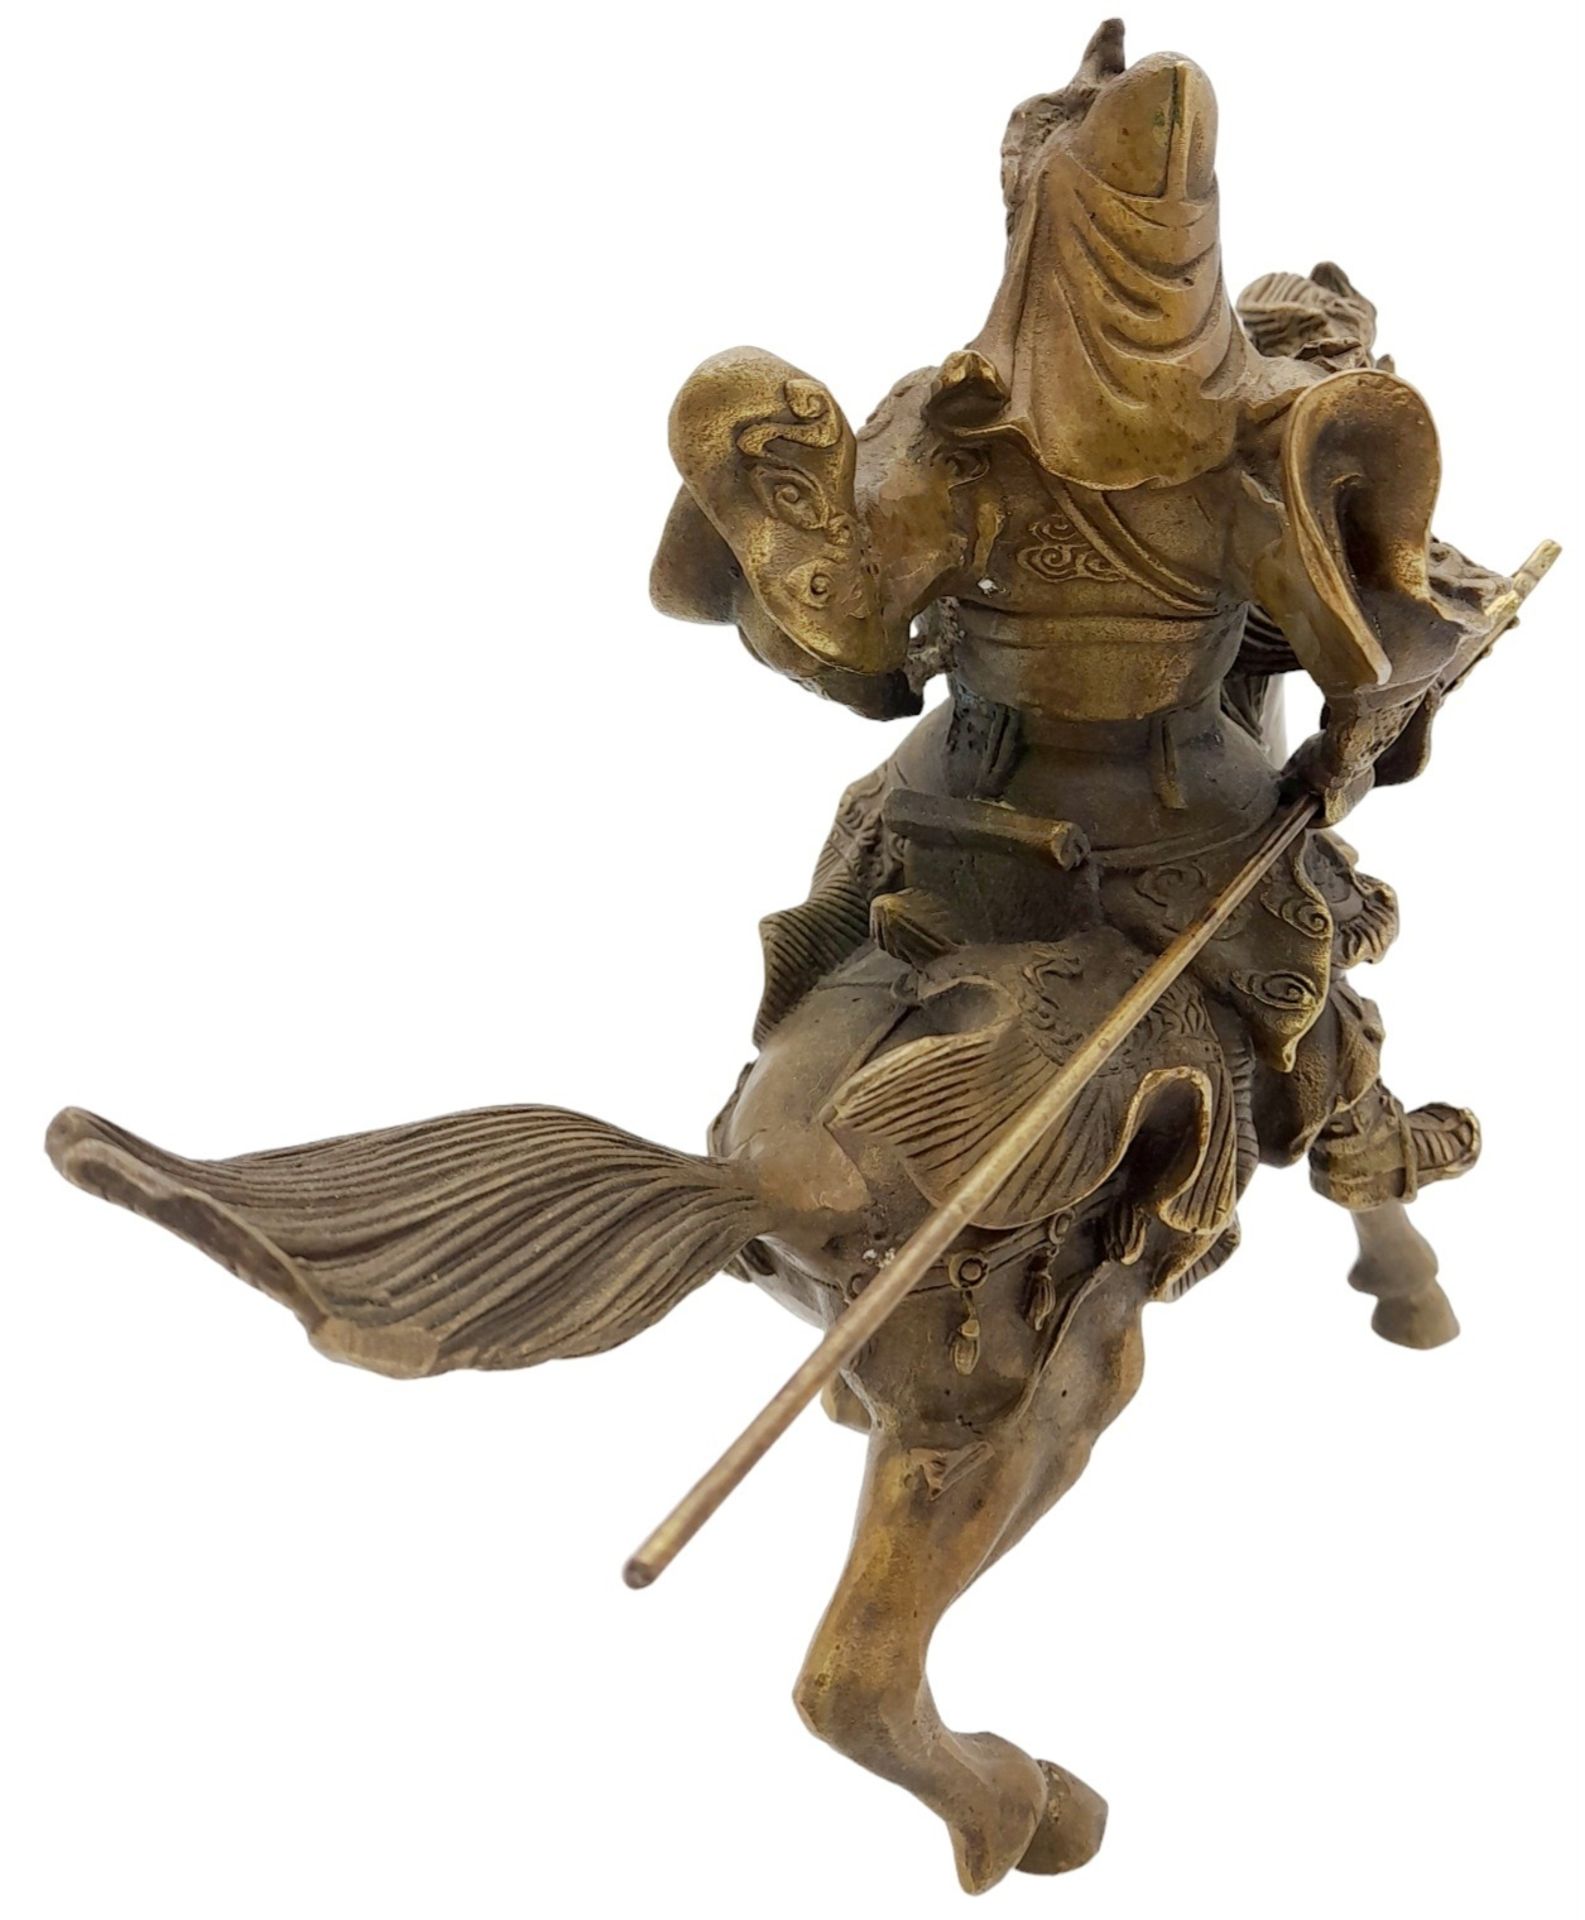 A Vintage Chinese Copper Guan Gong (God of war and wealth) on Horseback Statue. 23cm x 19cm tall. - Image 4 of 6